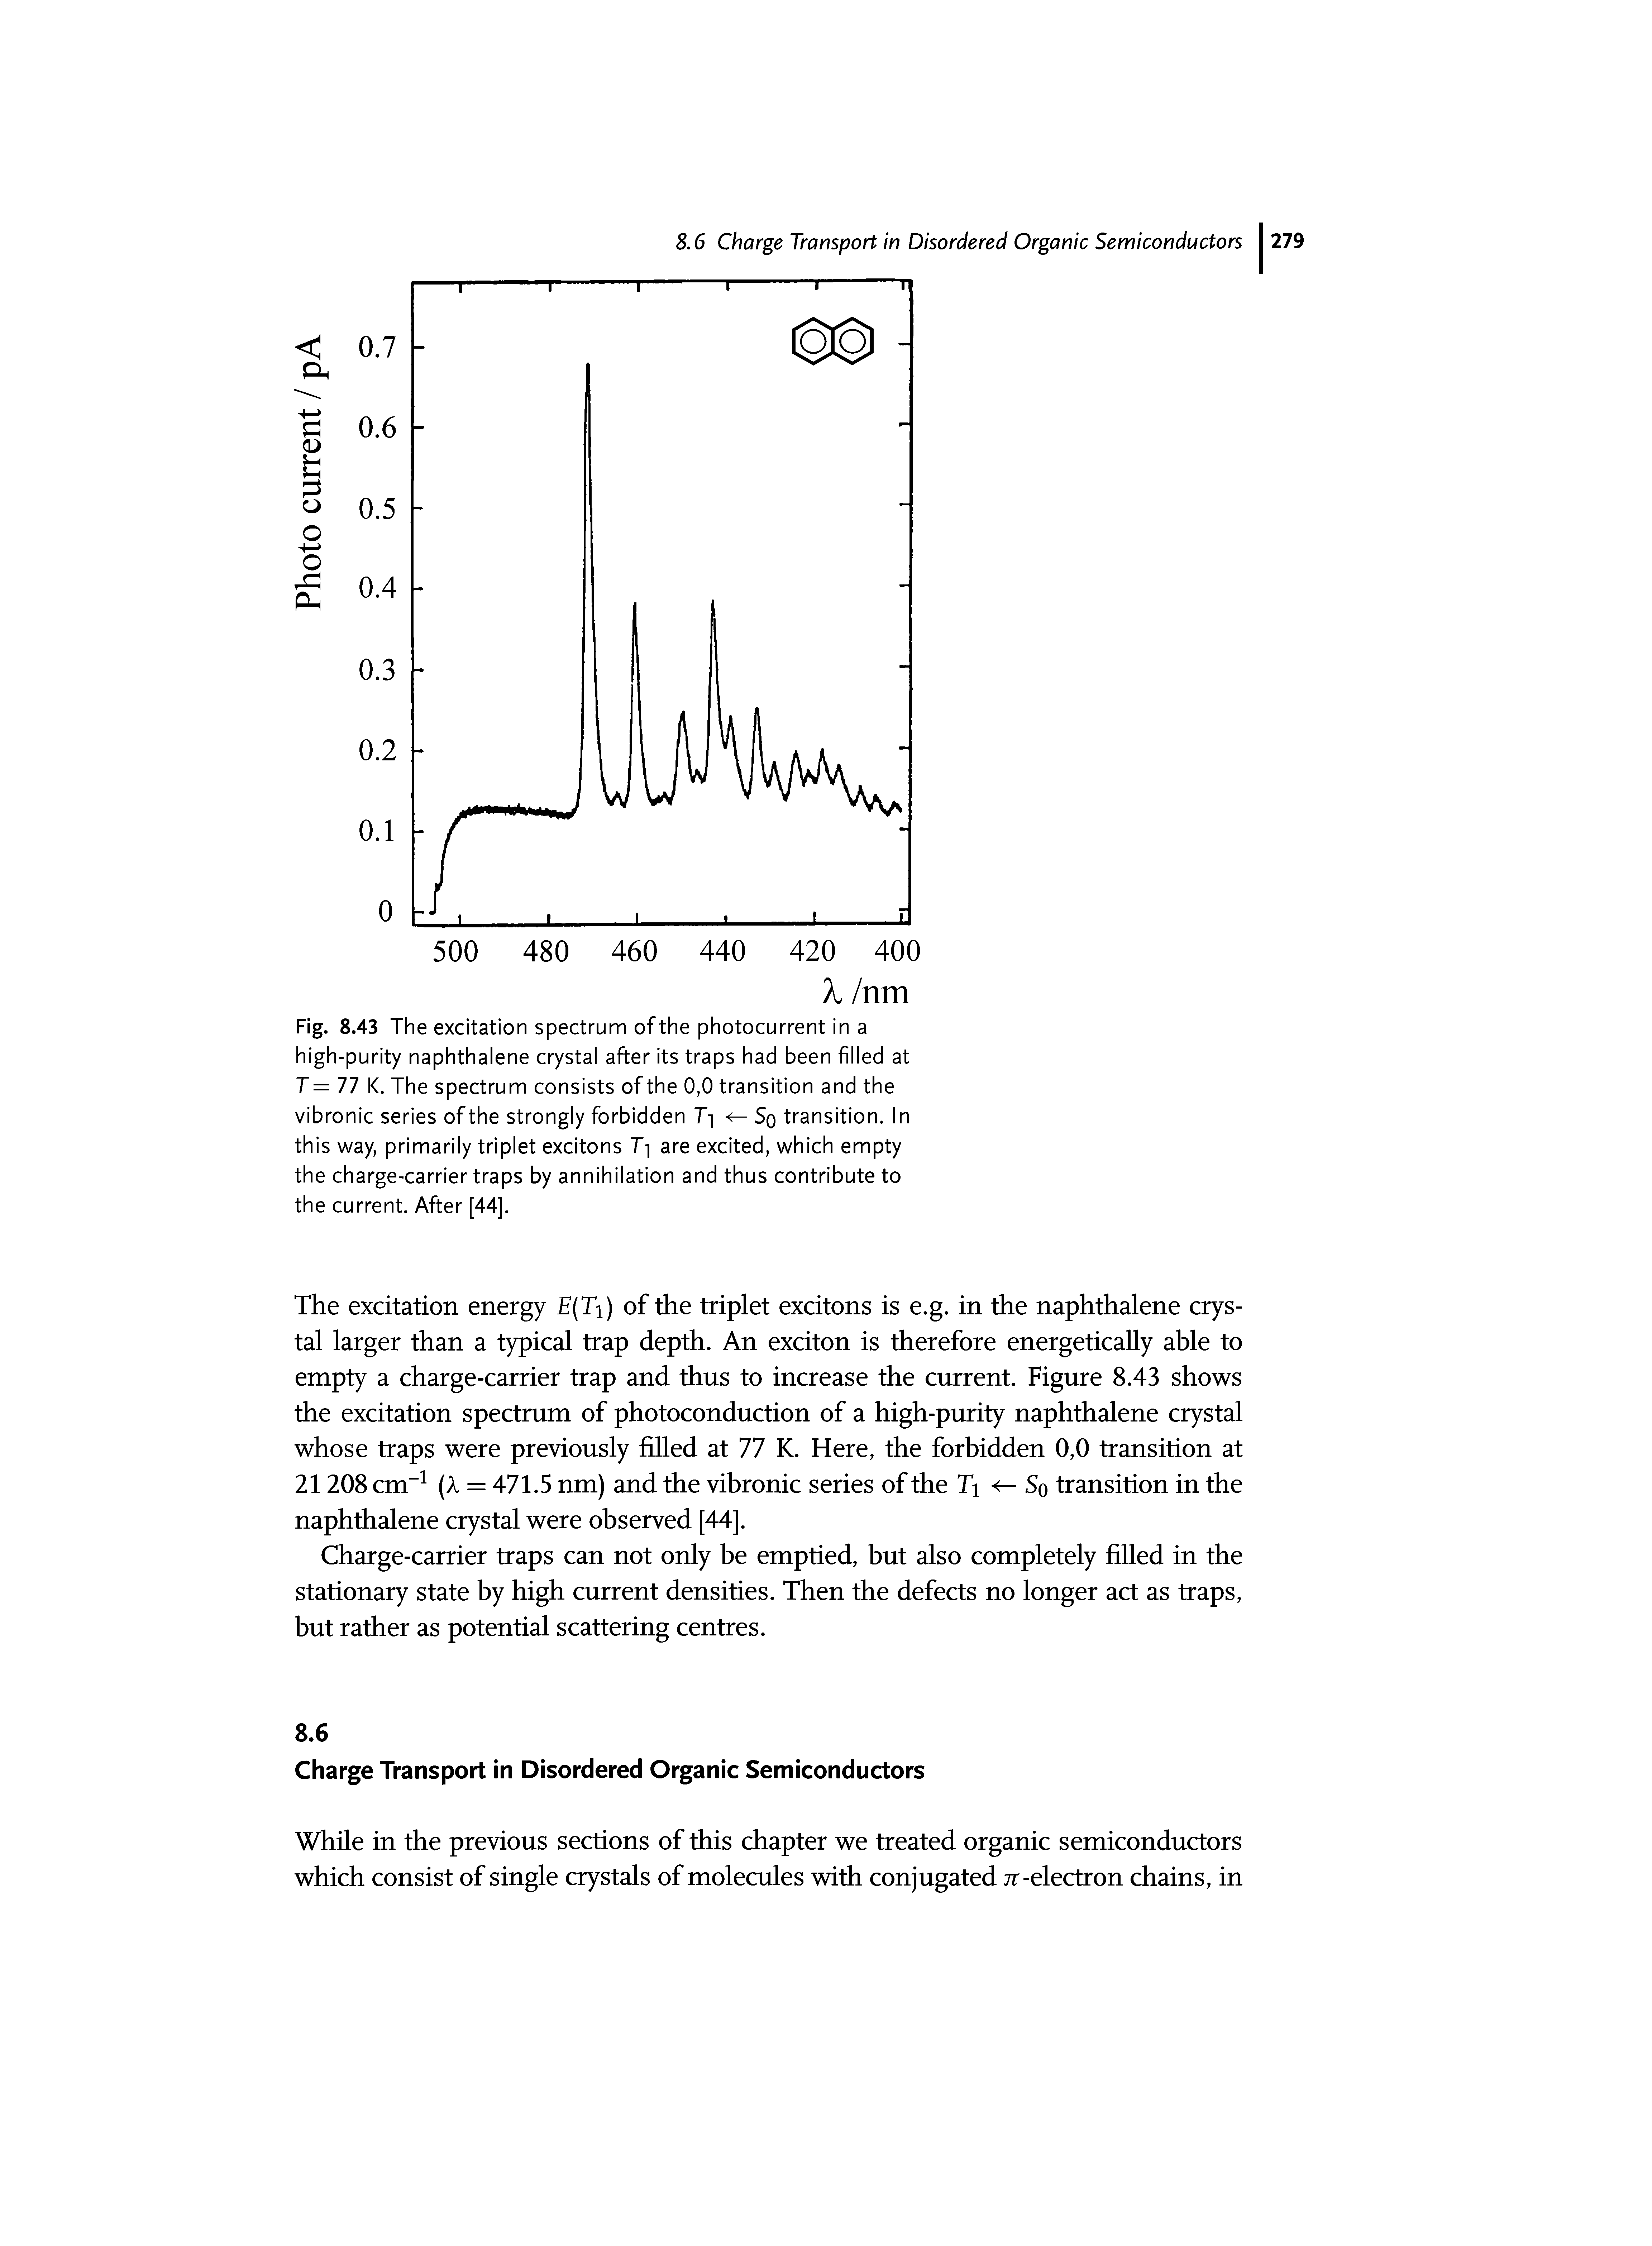 Fig. 8.43 The excitation spectrum of the photocurrent in a high-purity naphthalene crystal after its traps had been filled at T=77 K. The spectrum consists of the 0,0 transition and the vibronic series of the strongly forbidden T] Sq transition. In this way, primarily triplet excitons T] are excited, which empty the charge-carrier traps by annihilation and thus contribute to the current. After [44].